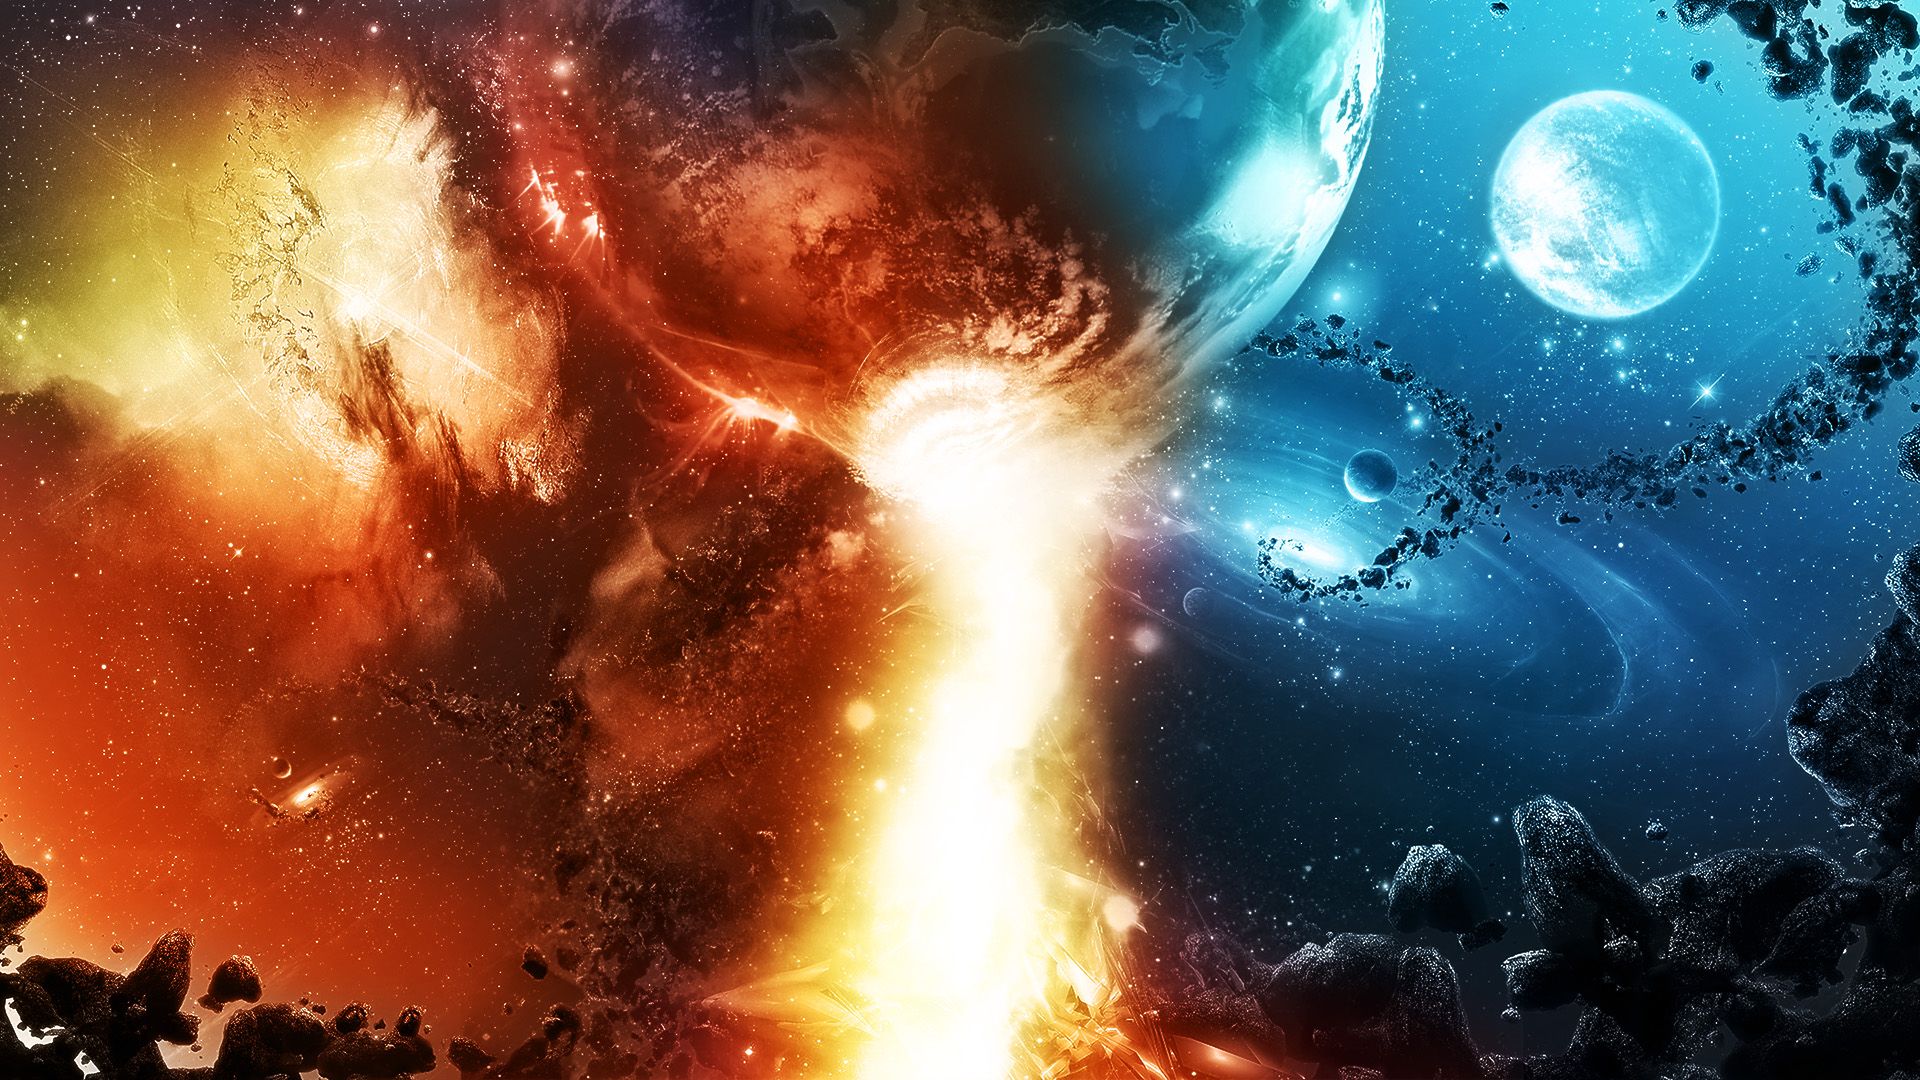 blue, red, planets, fire, asteroids wallpaper